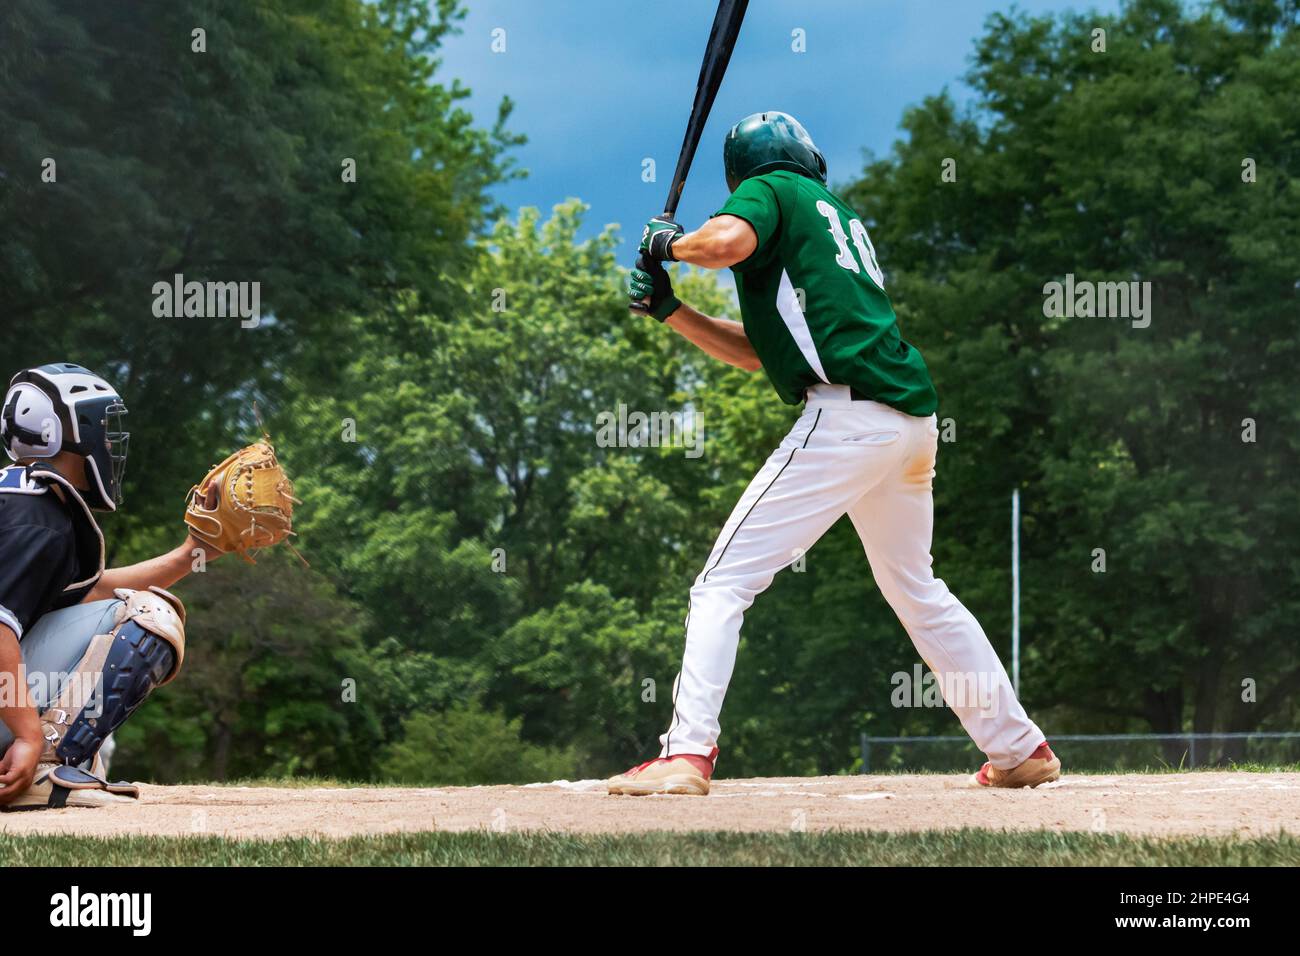 A batter and catcher await the pitch.  Adult male baseball players. Stock Photo